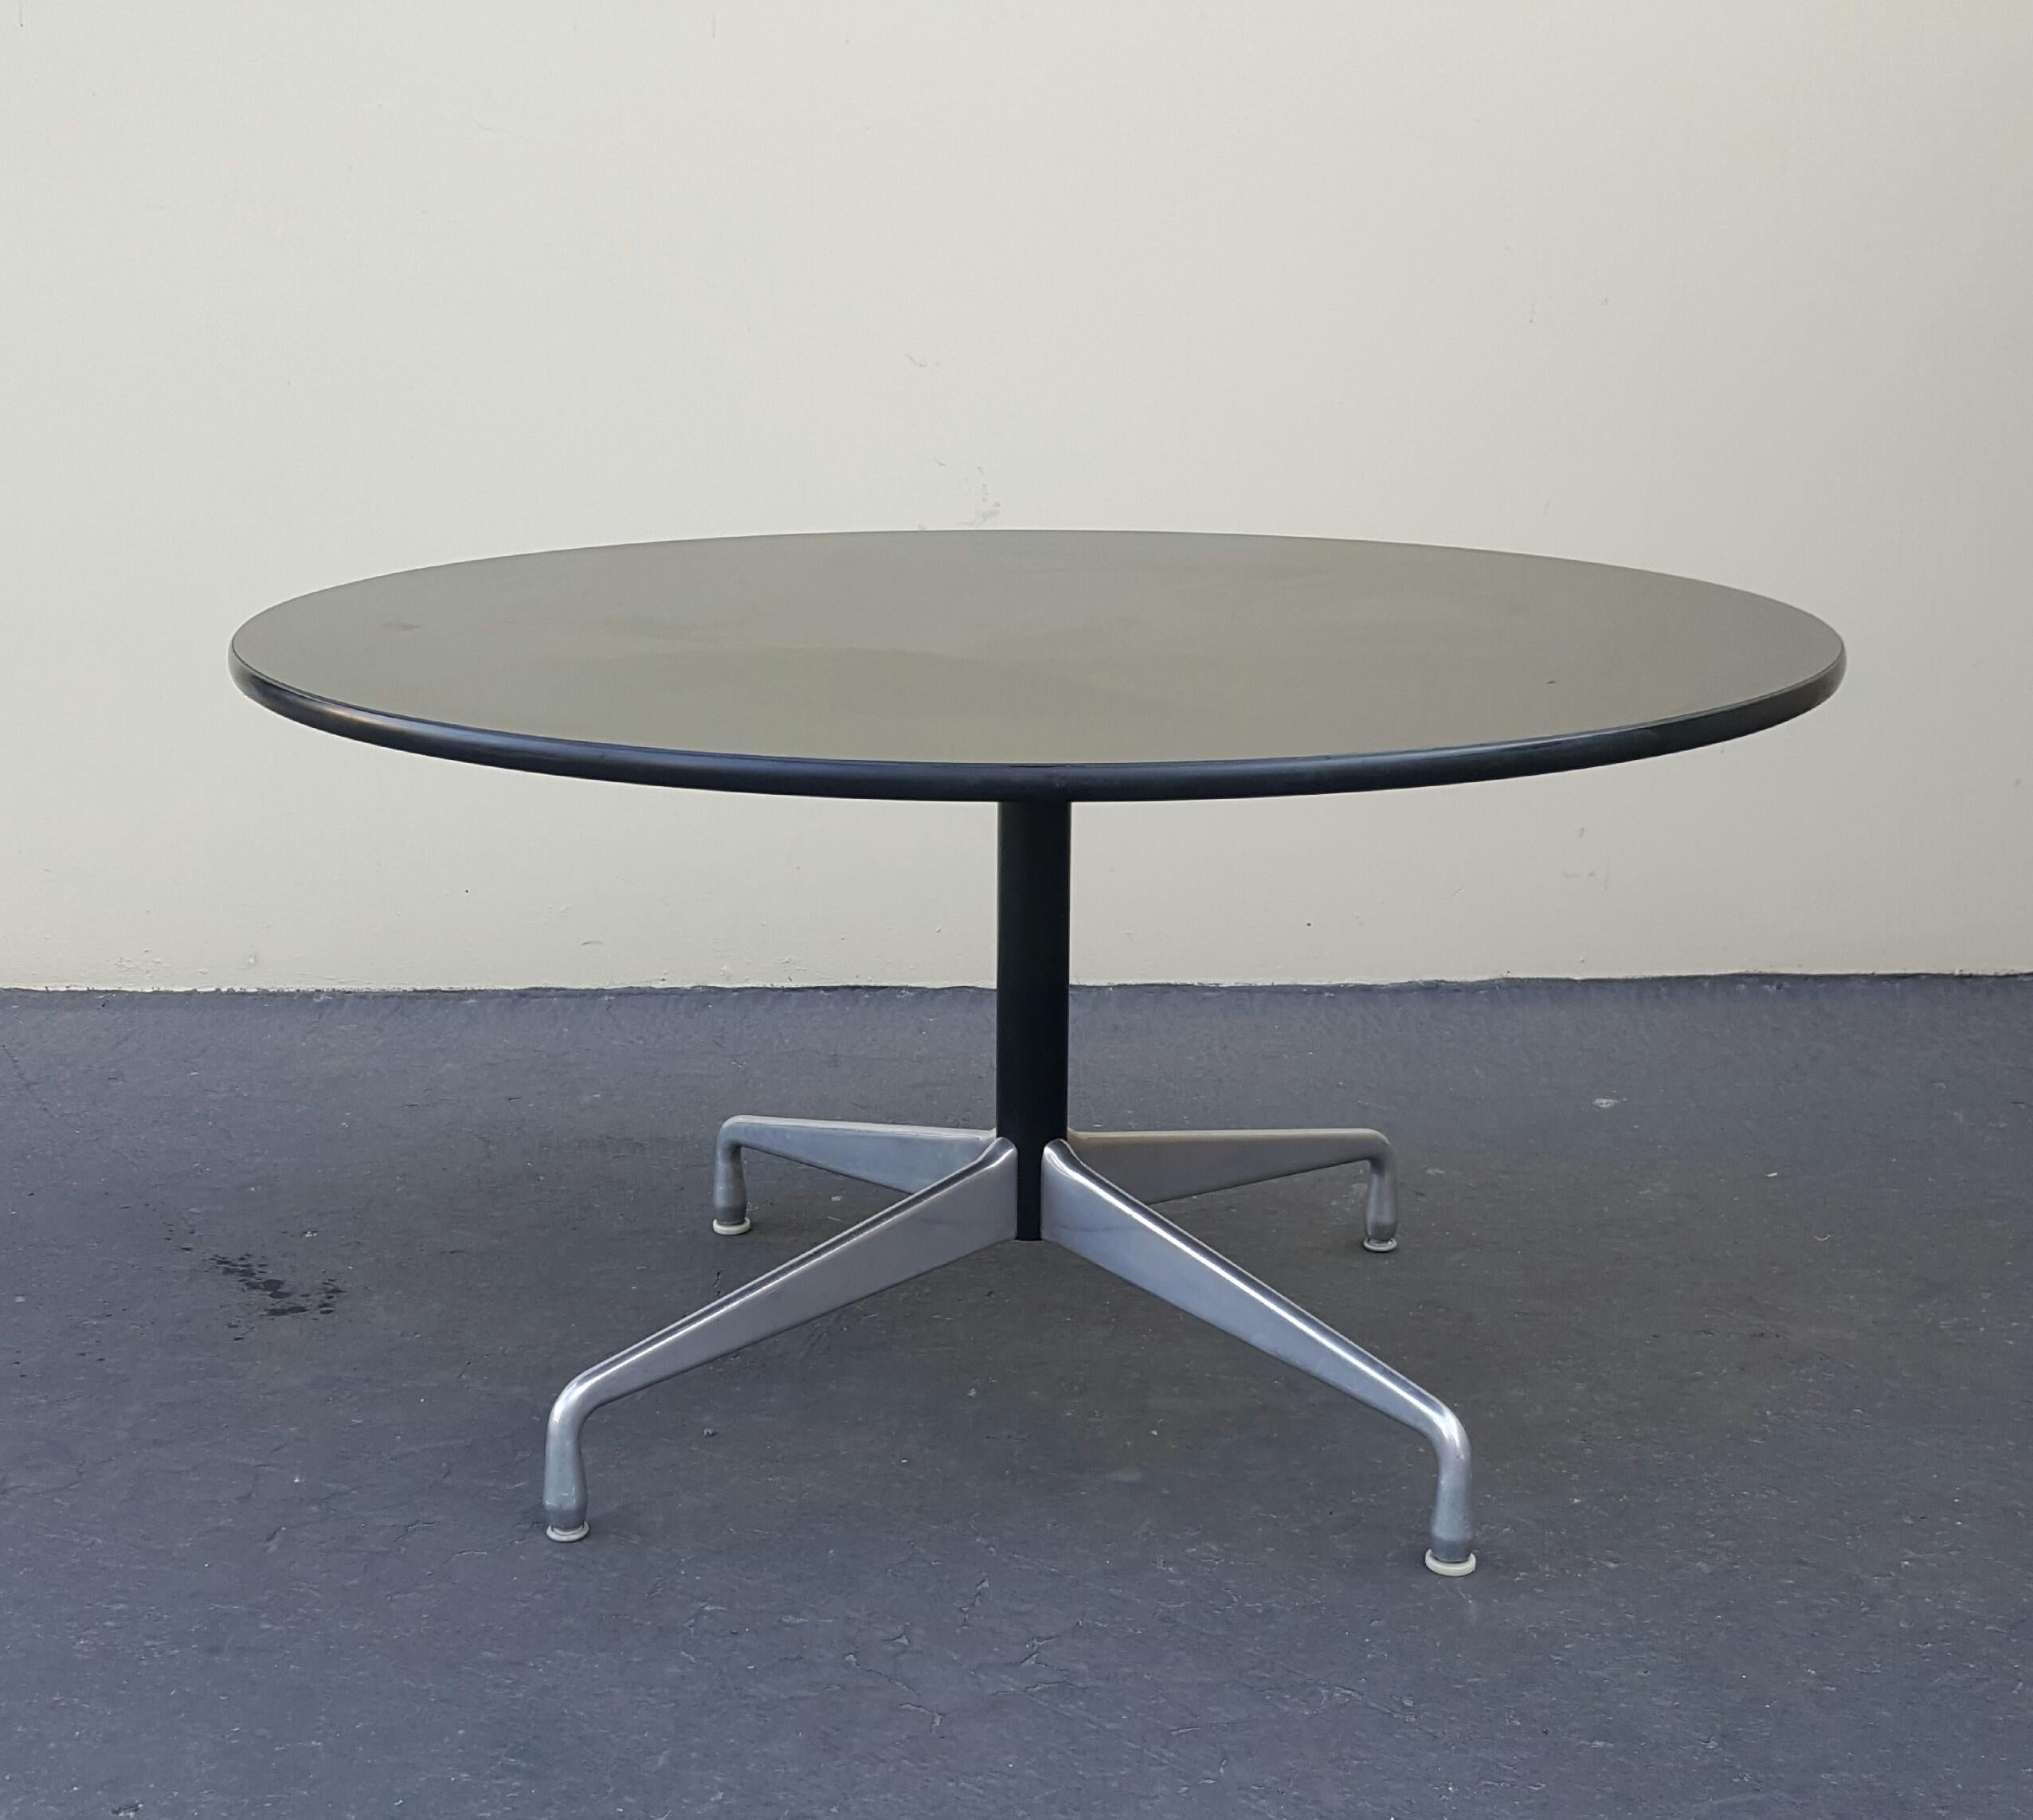 1960s Charles Eames Herman Miller Round Black Conference or Dining Table For Sale 5